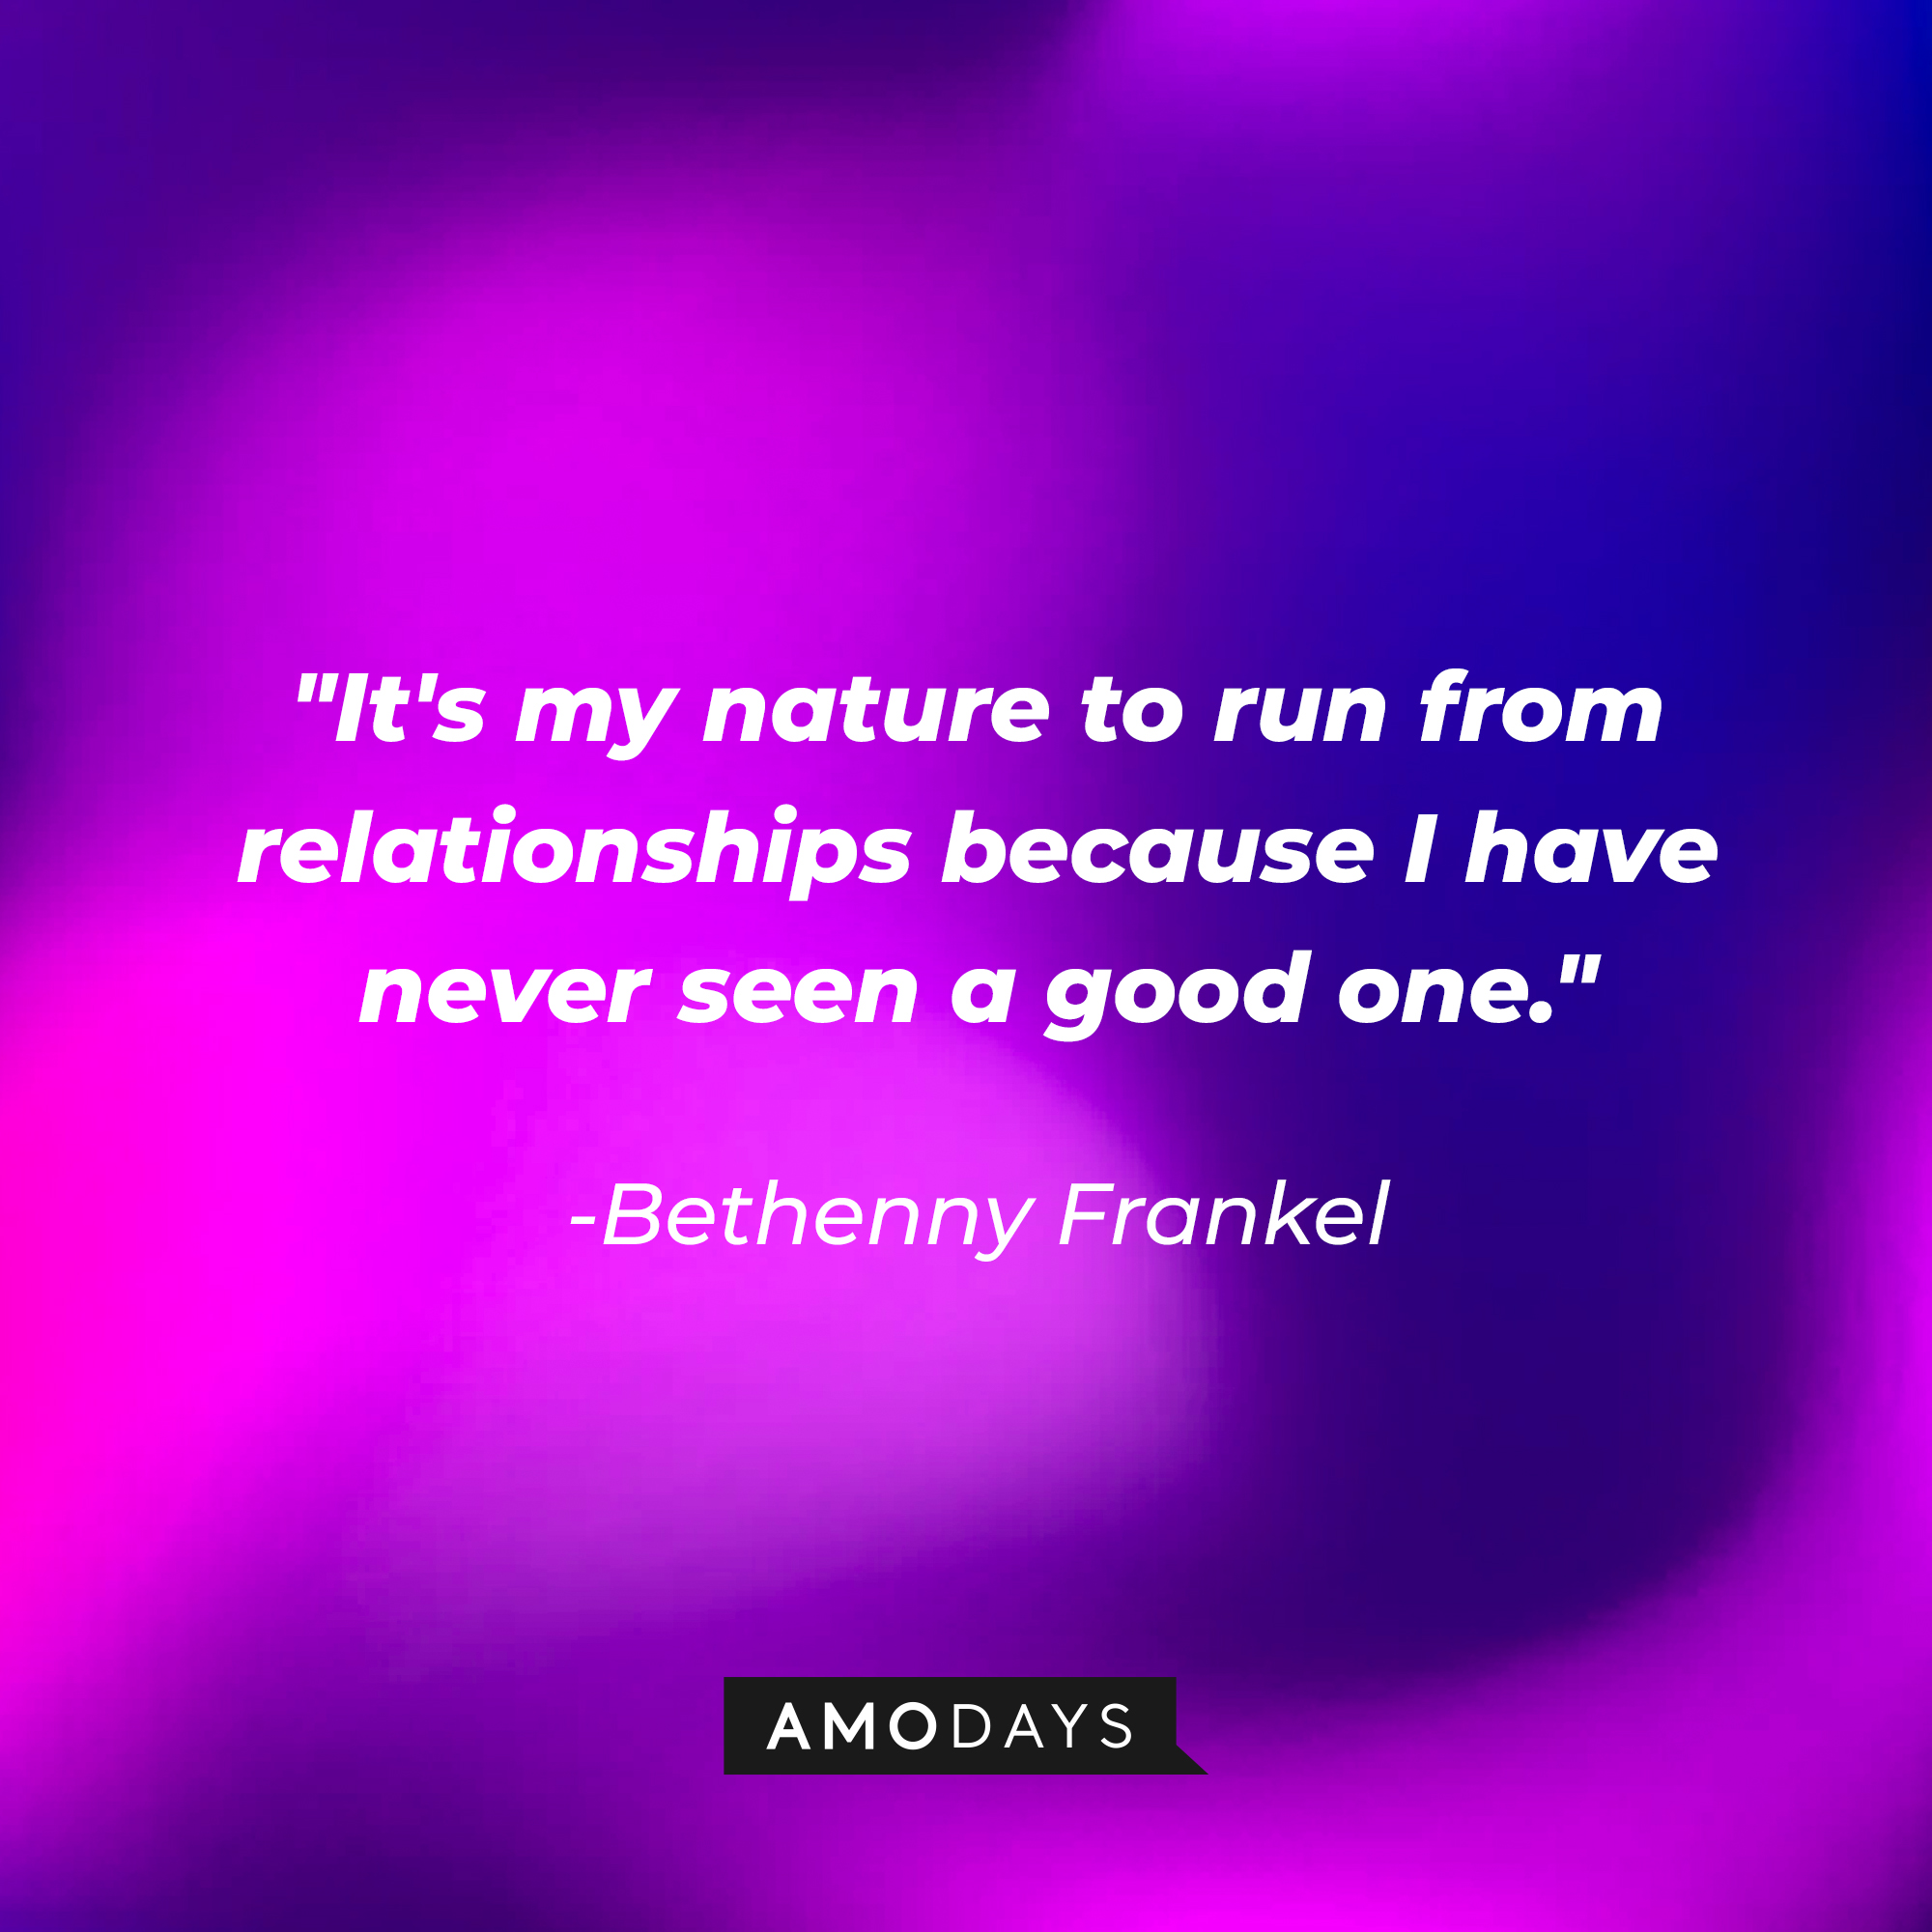 Bethenny Frankel's quote: "It's my nature to run from relationships because I have never seen a good one." | Source: Amodays